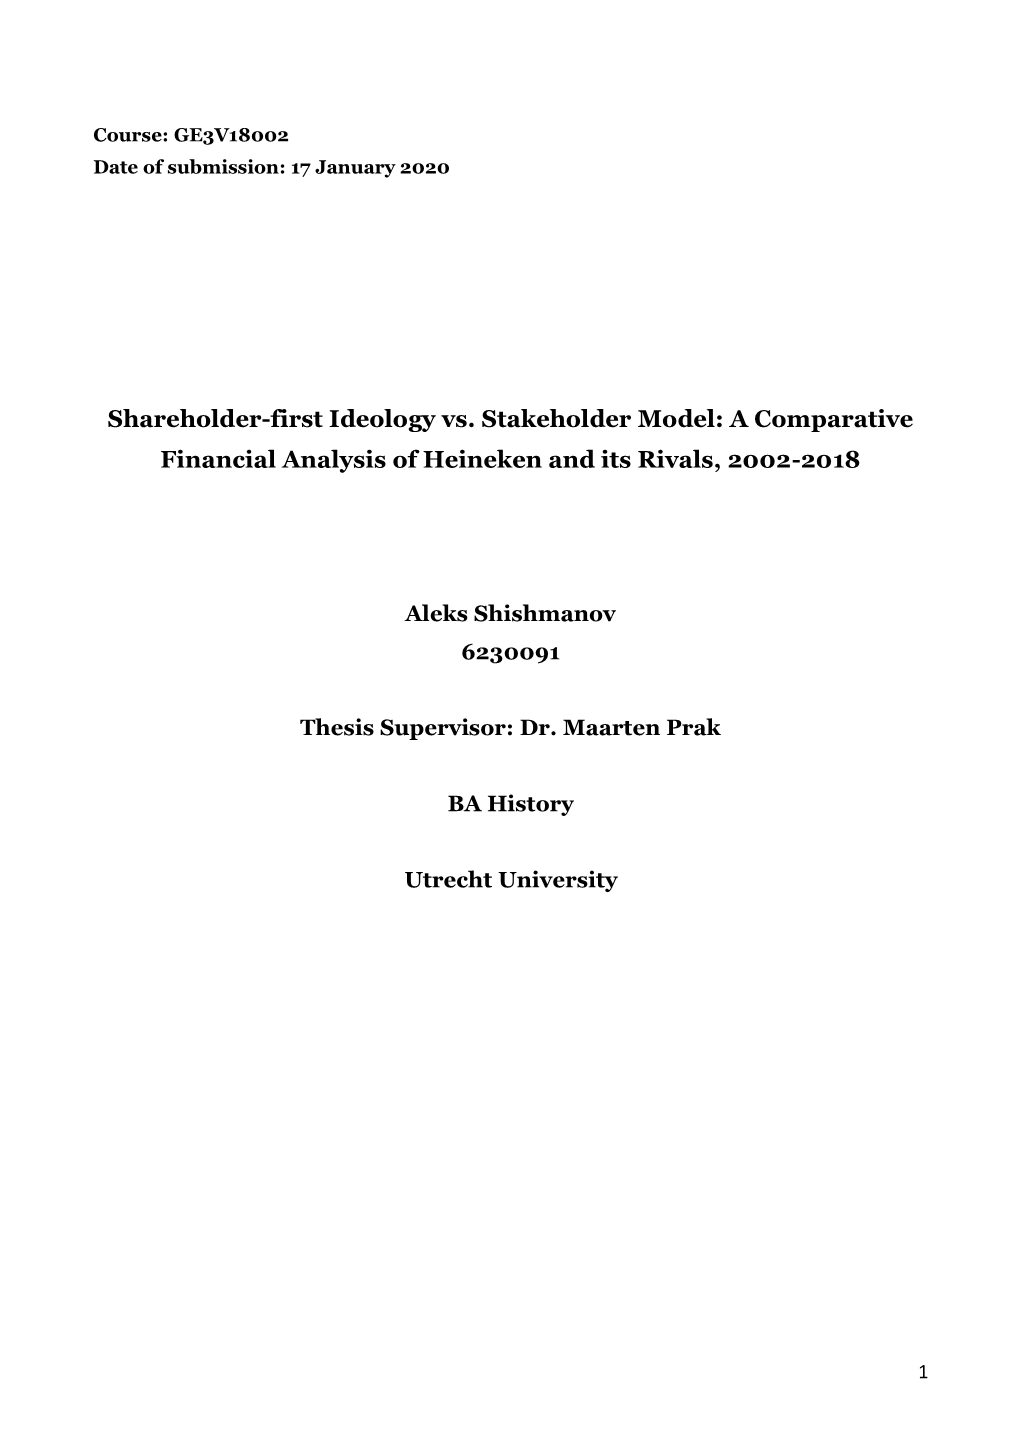 Shareholder-First Ideology Vs. Stakeholder Model: a Comparative Financial Analysis of Heineken and Its Rivals, 2002-2018